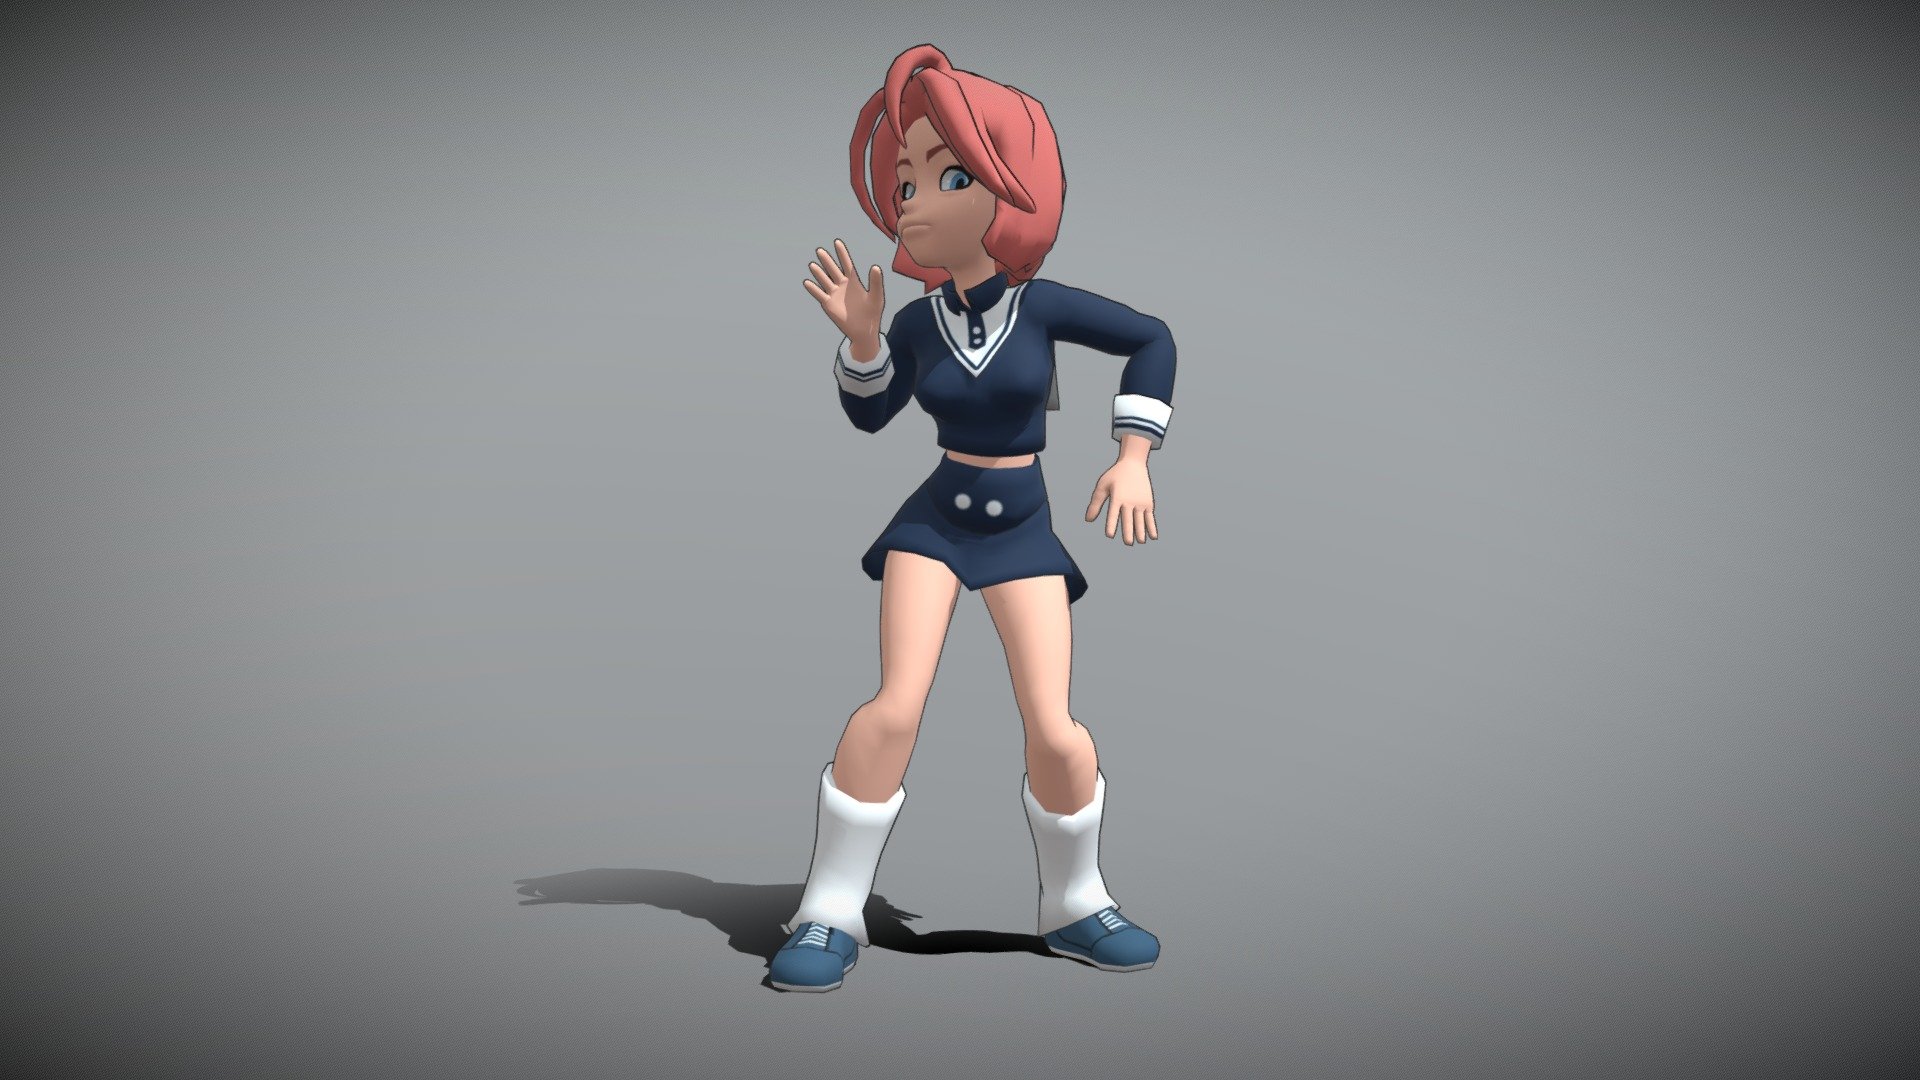 She was made 100% inside Blender 

My page on Facebook

My chanel on Youtube

My Artstation

To 3D Characters models commission - boskonovit@gmail.com - School Girl Dancing - Buy Royalty Free 3D model by Pedro Galvão (@boskonovit) 3d model